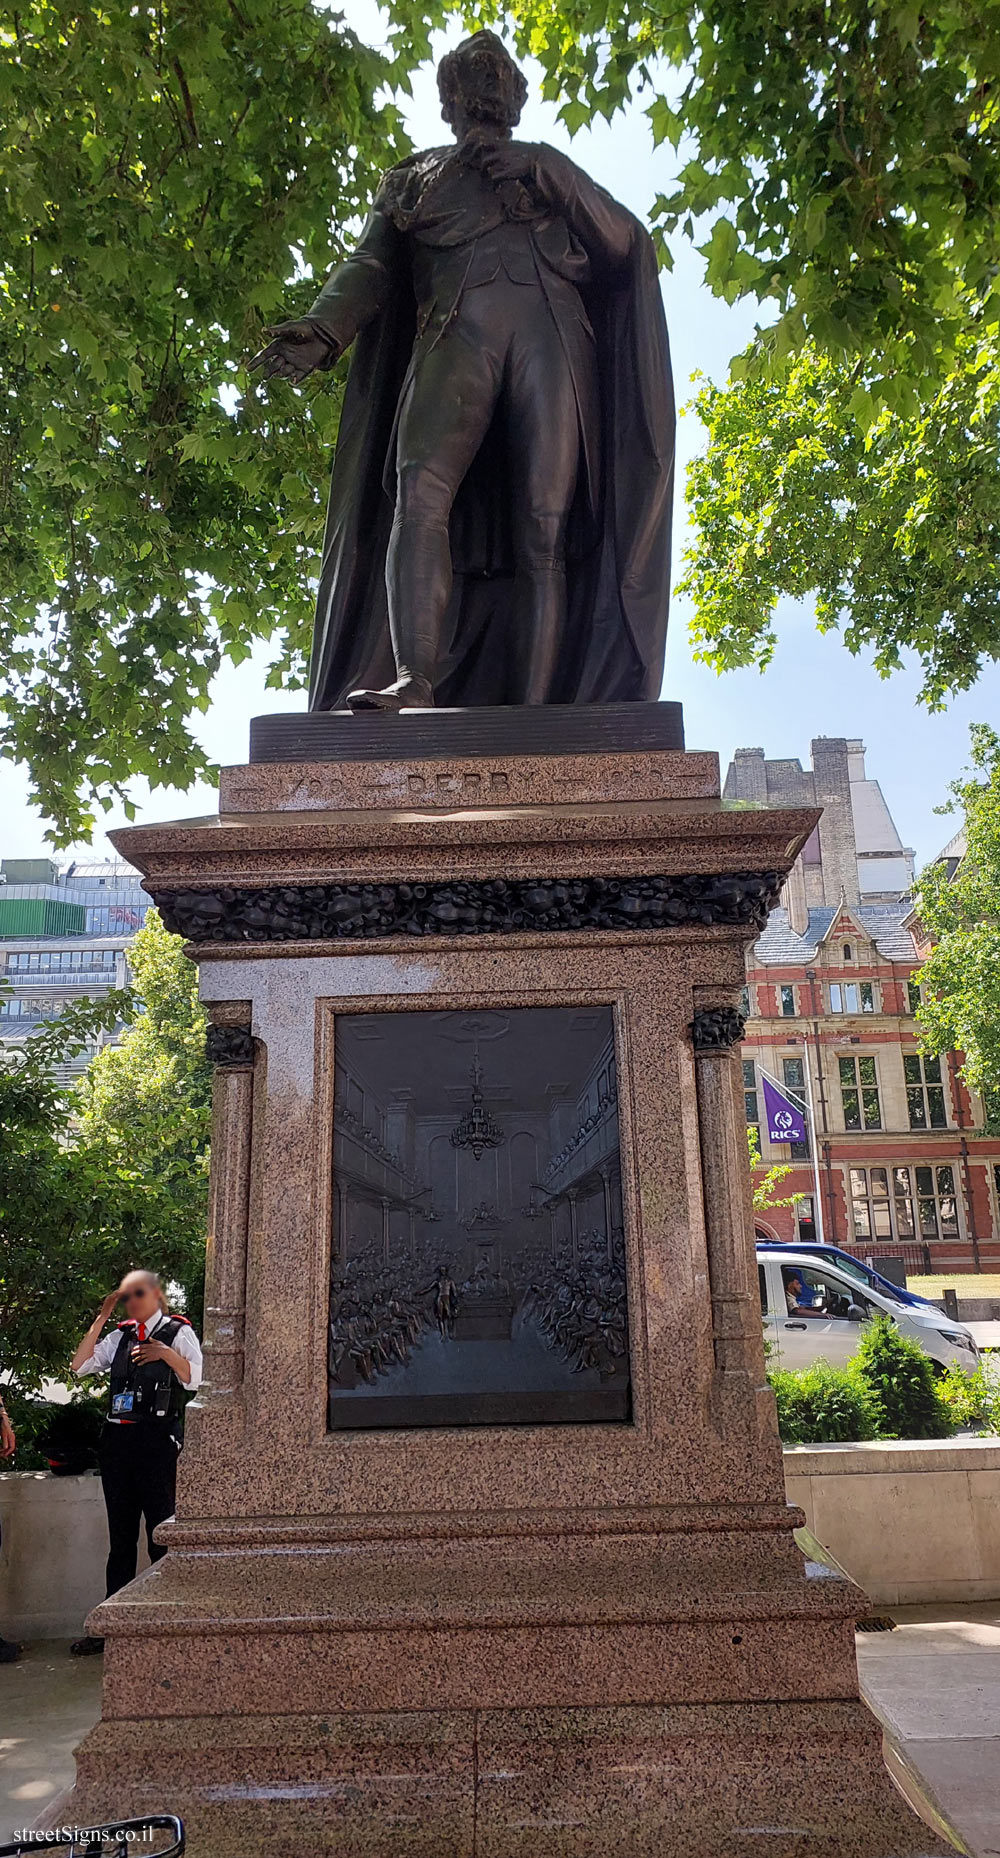 London - The statue of Edward Smith-Stanley, 14th Earl of Derby - 1 Horse Guards Rd, London SW1A 2HQ, UK